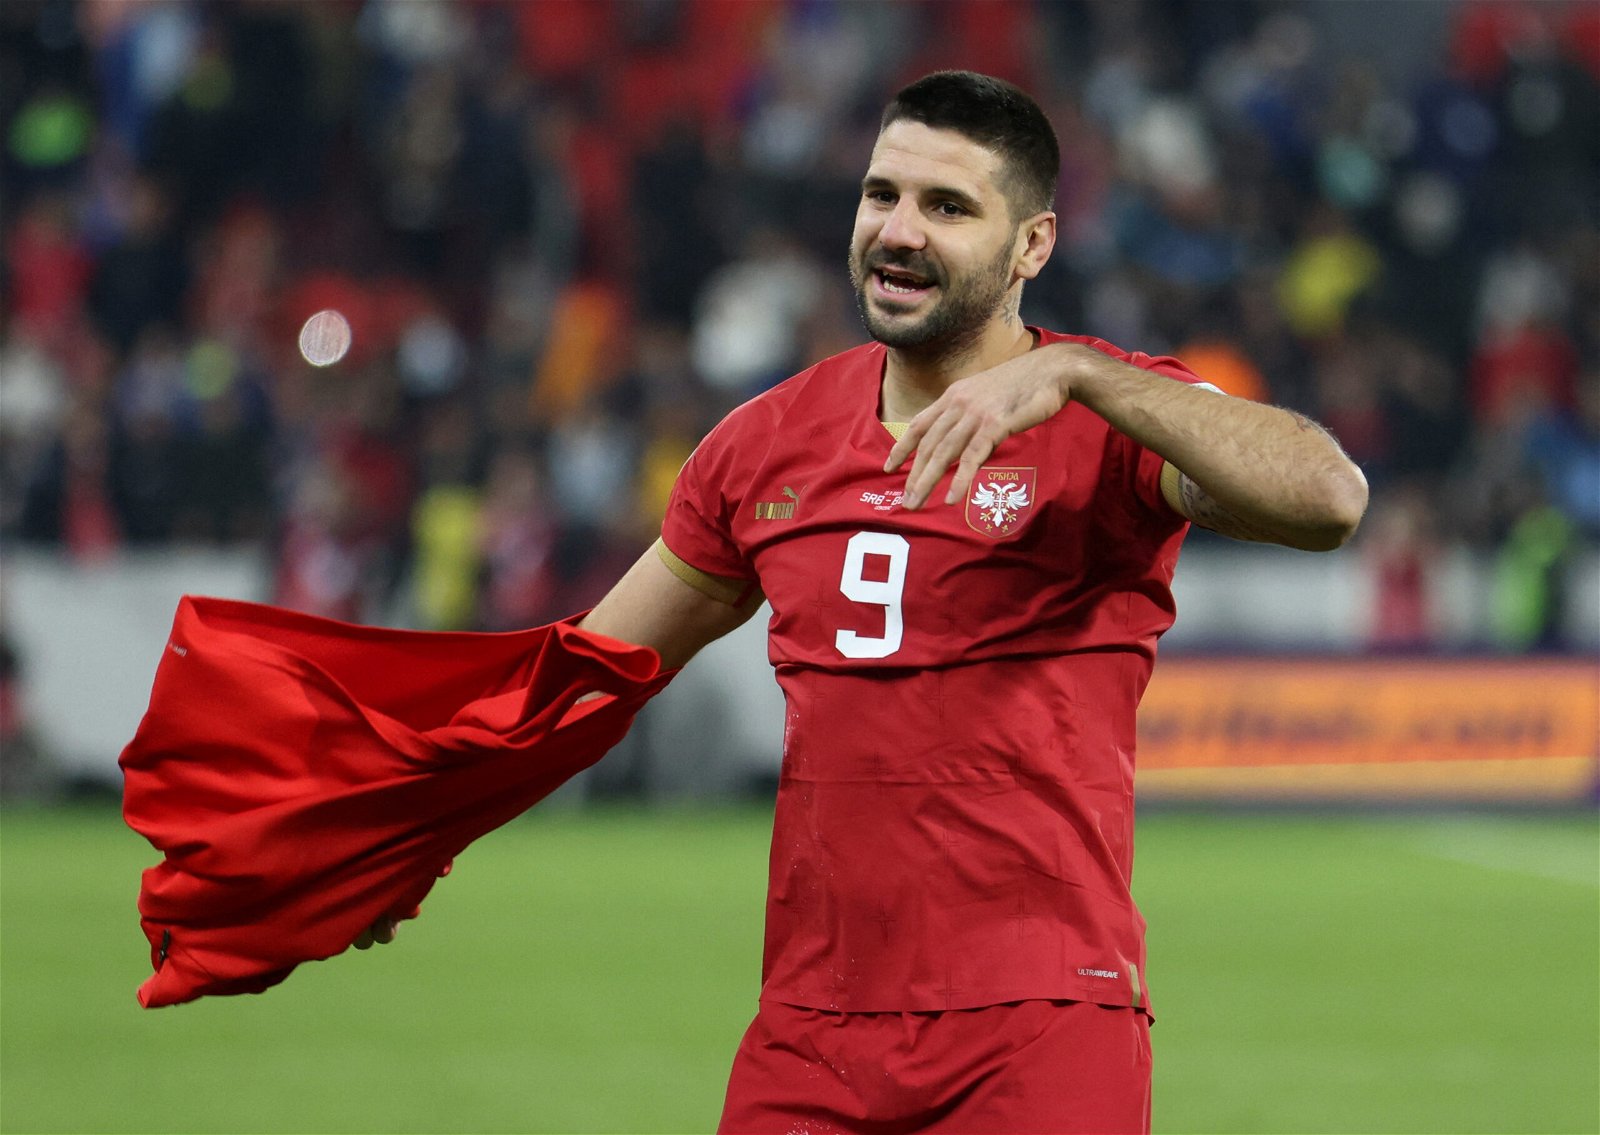 Aleksandar Mitrovic is one of the key players in the Danish Euro Squad